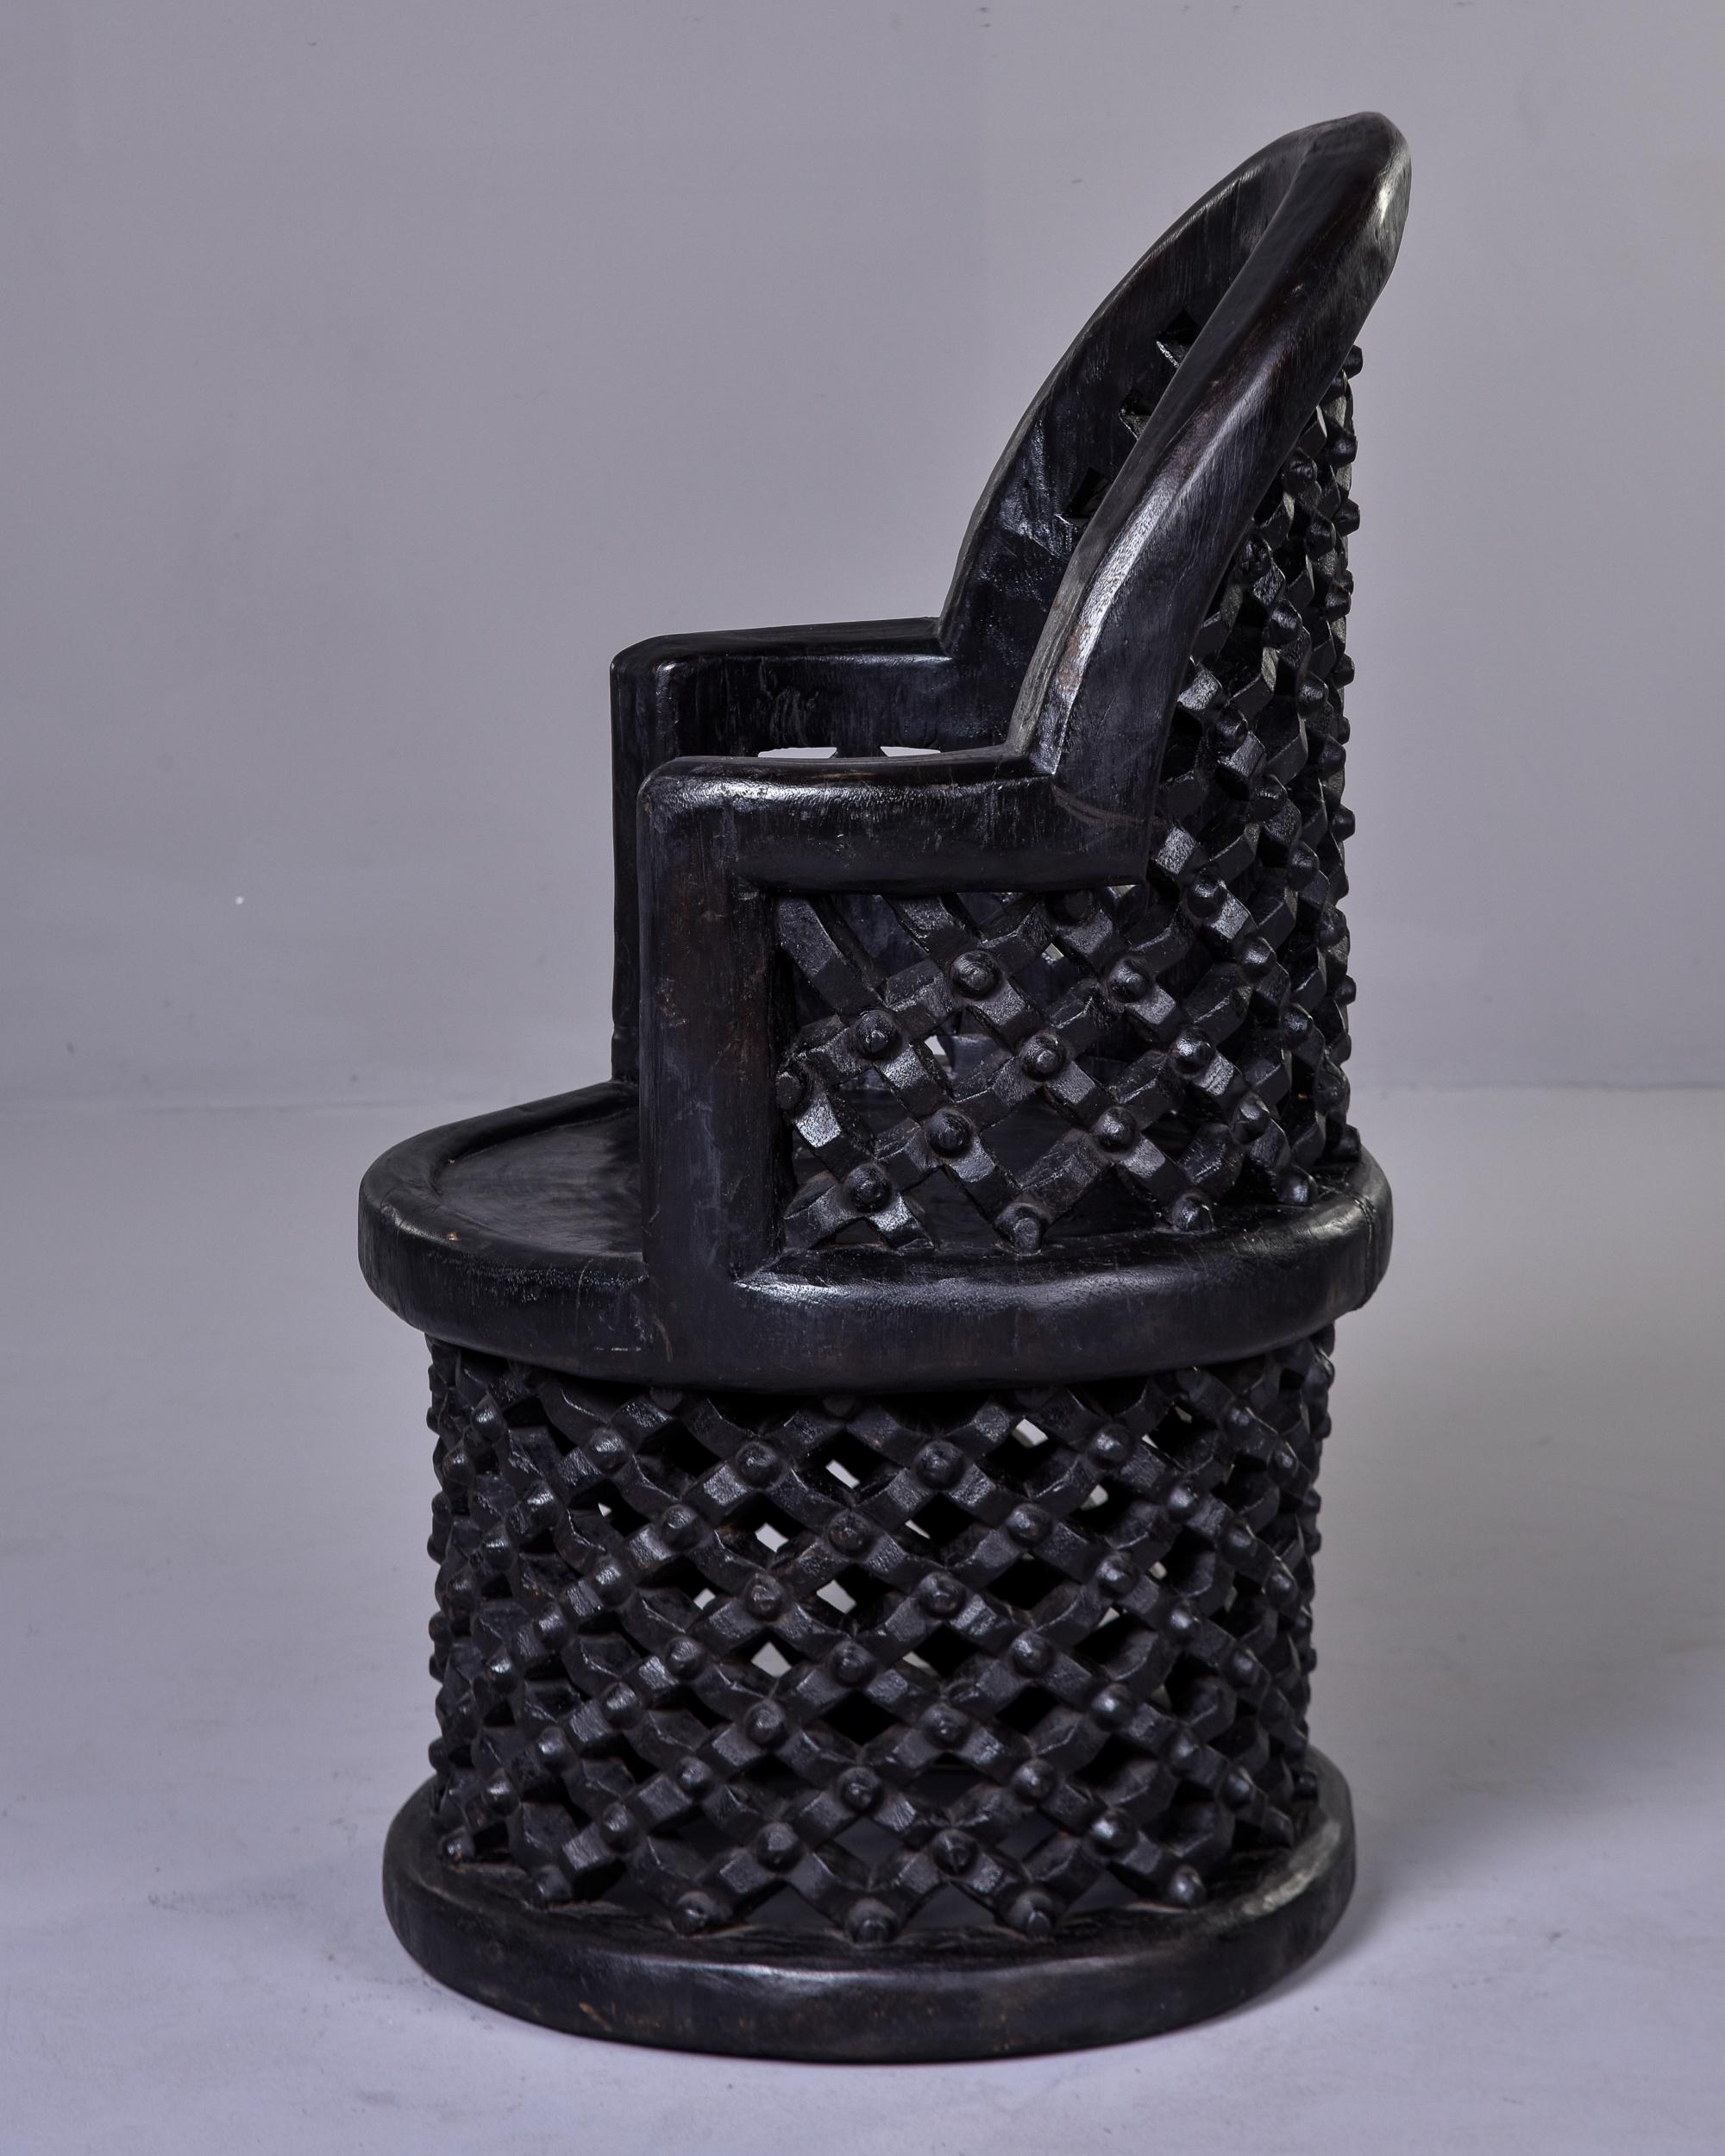 Tribal Carved African Bamileke Throne Chair For Sale